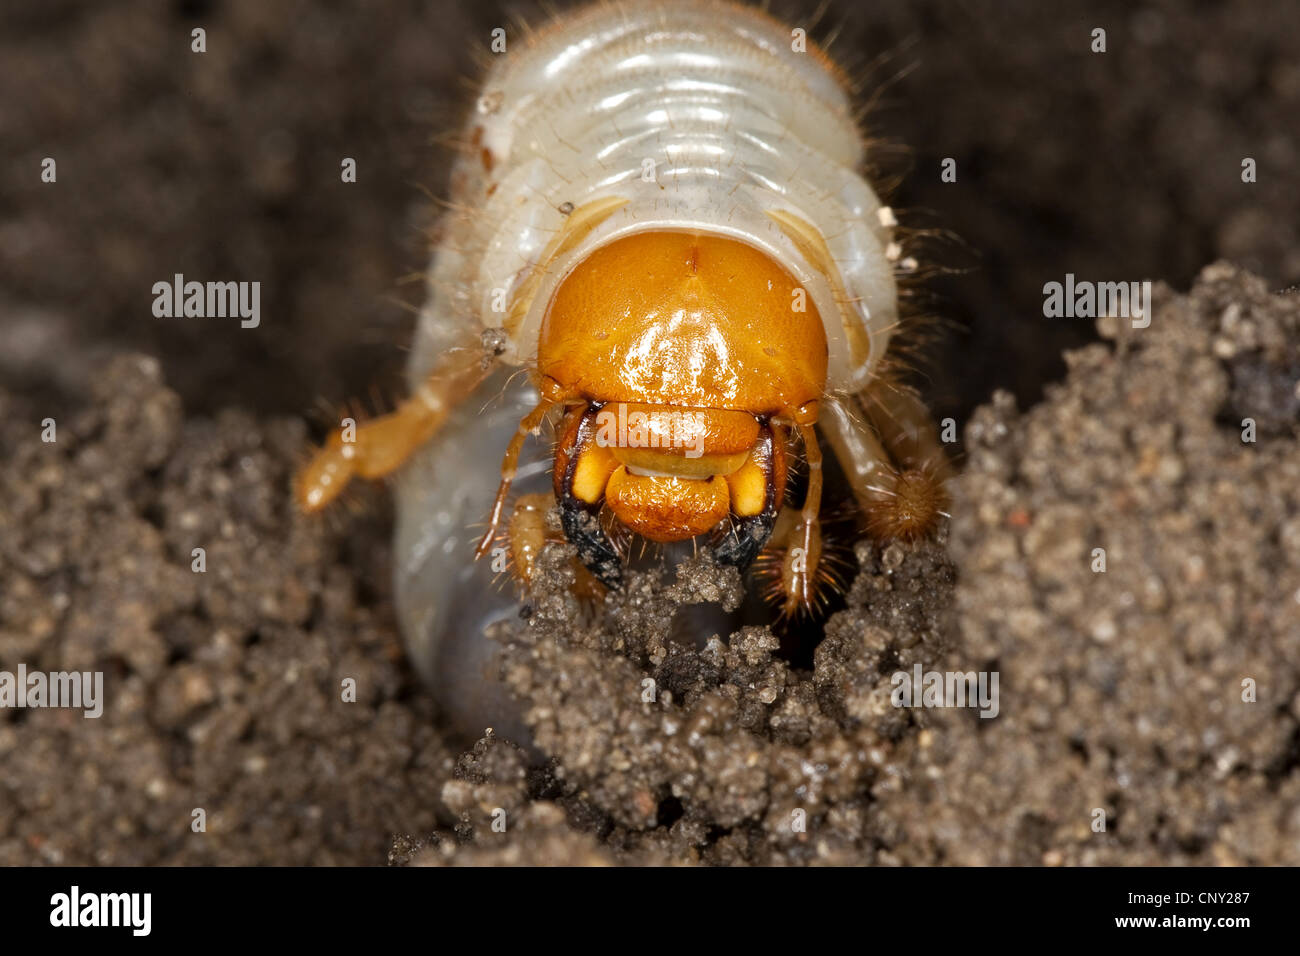 common cockchafer, maybug (Melolontha melolontha), portrait of a larva in soil ground, Germany Stock Photo